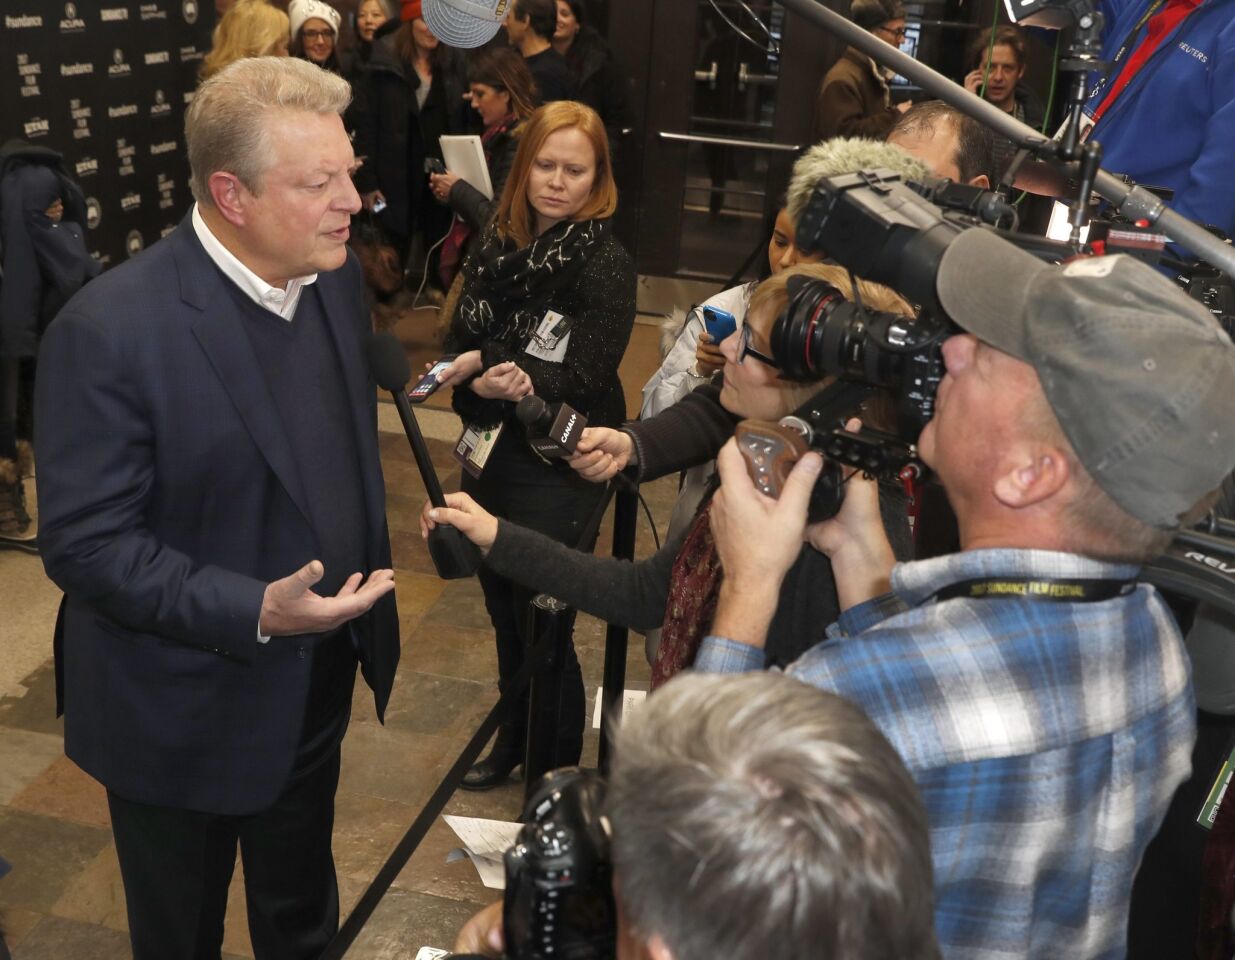 Former Vice President and cast member Al Gore speaks as he arrives for the premiere of "An Inconvenient Sequel: Truth to Power" at the 2017 Sundance Film Festival in Park City, Utah.